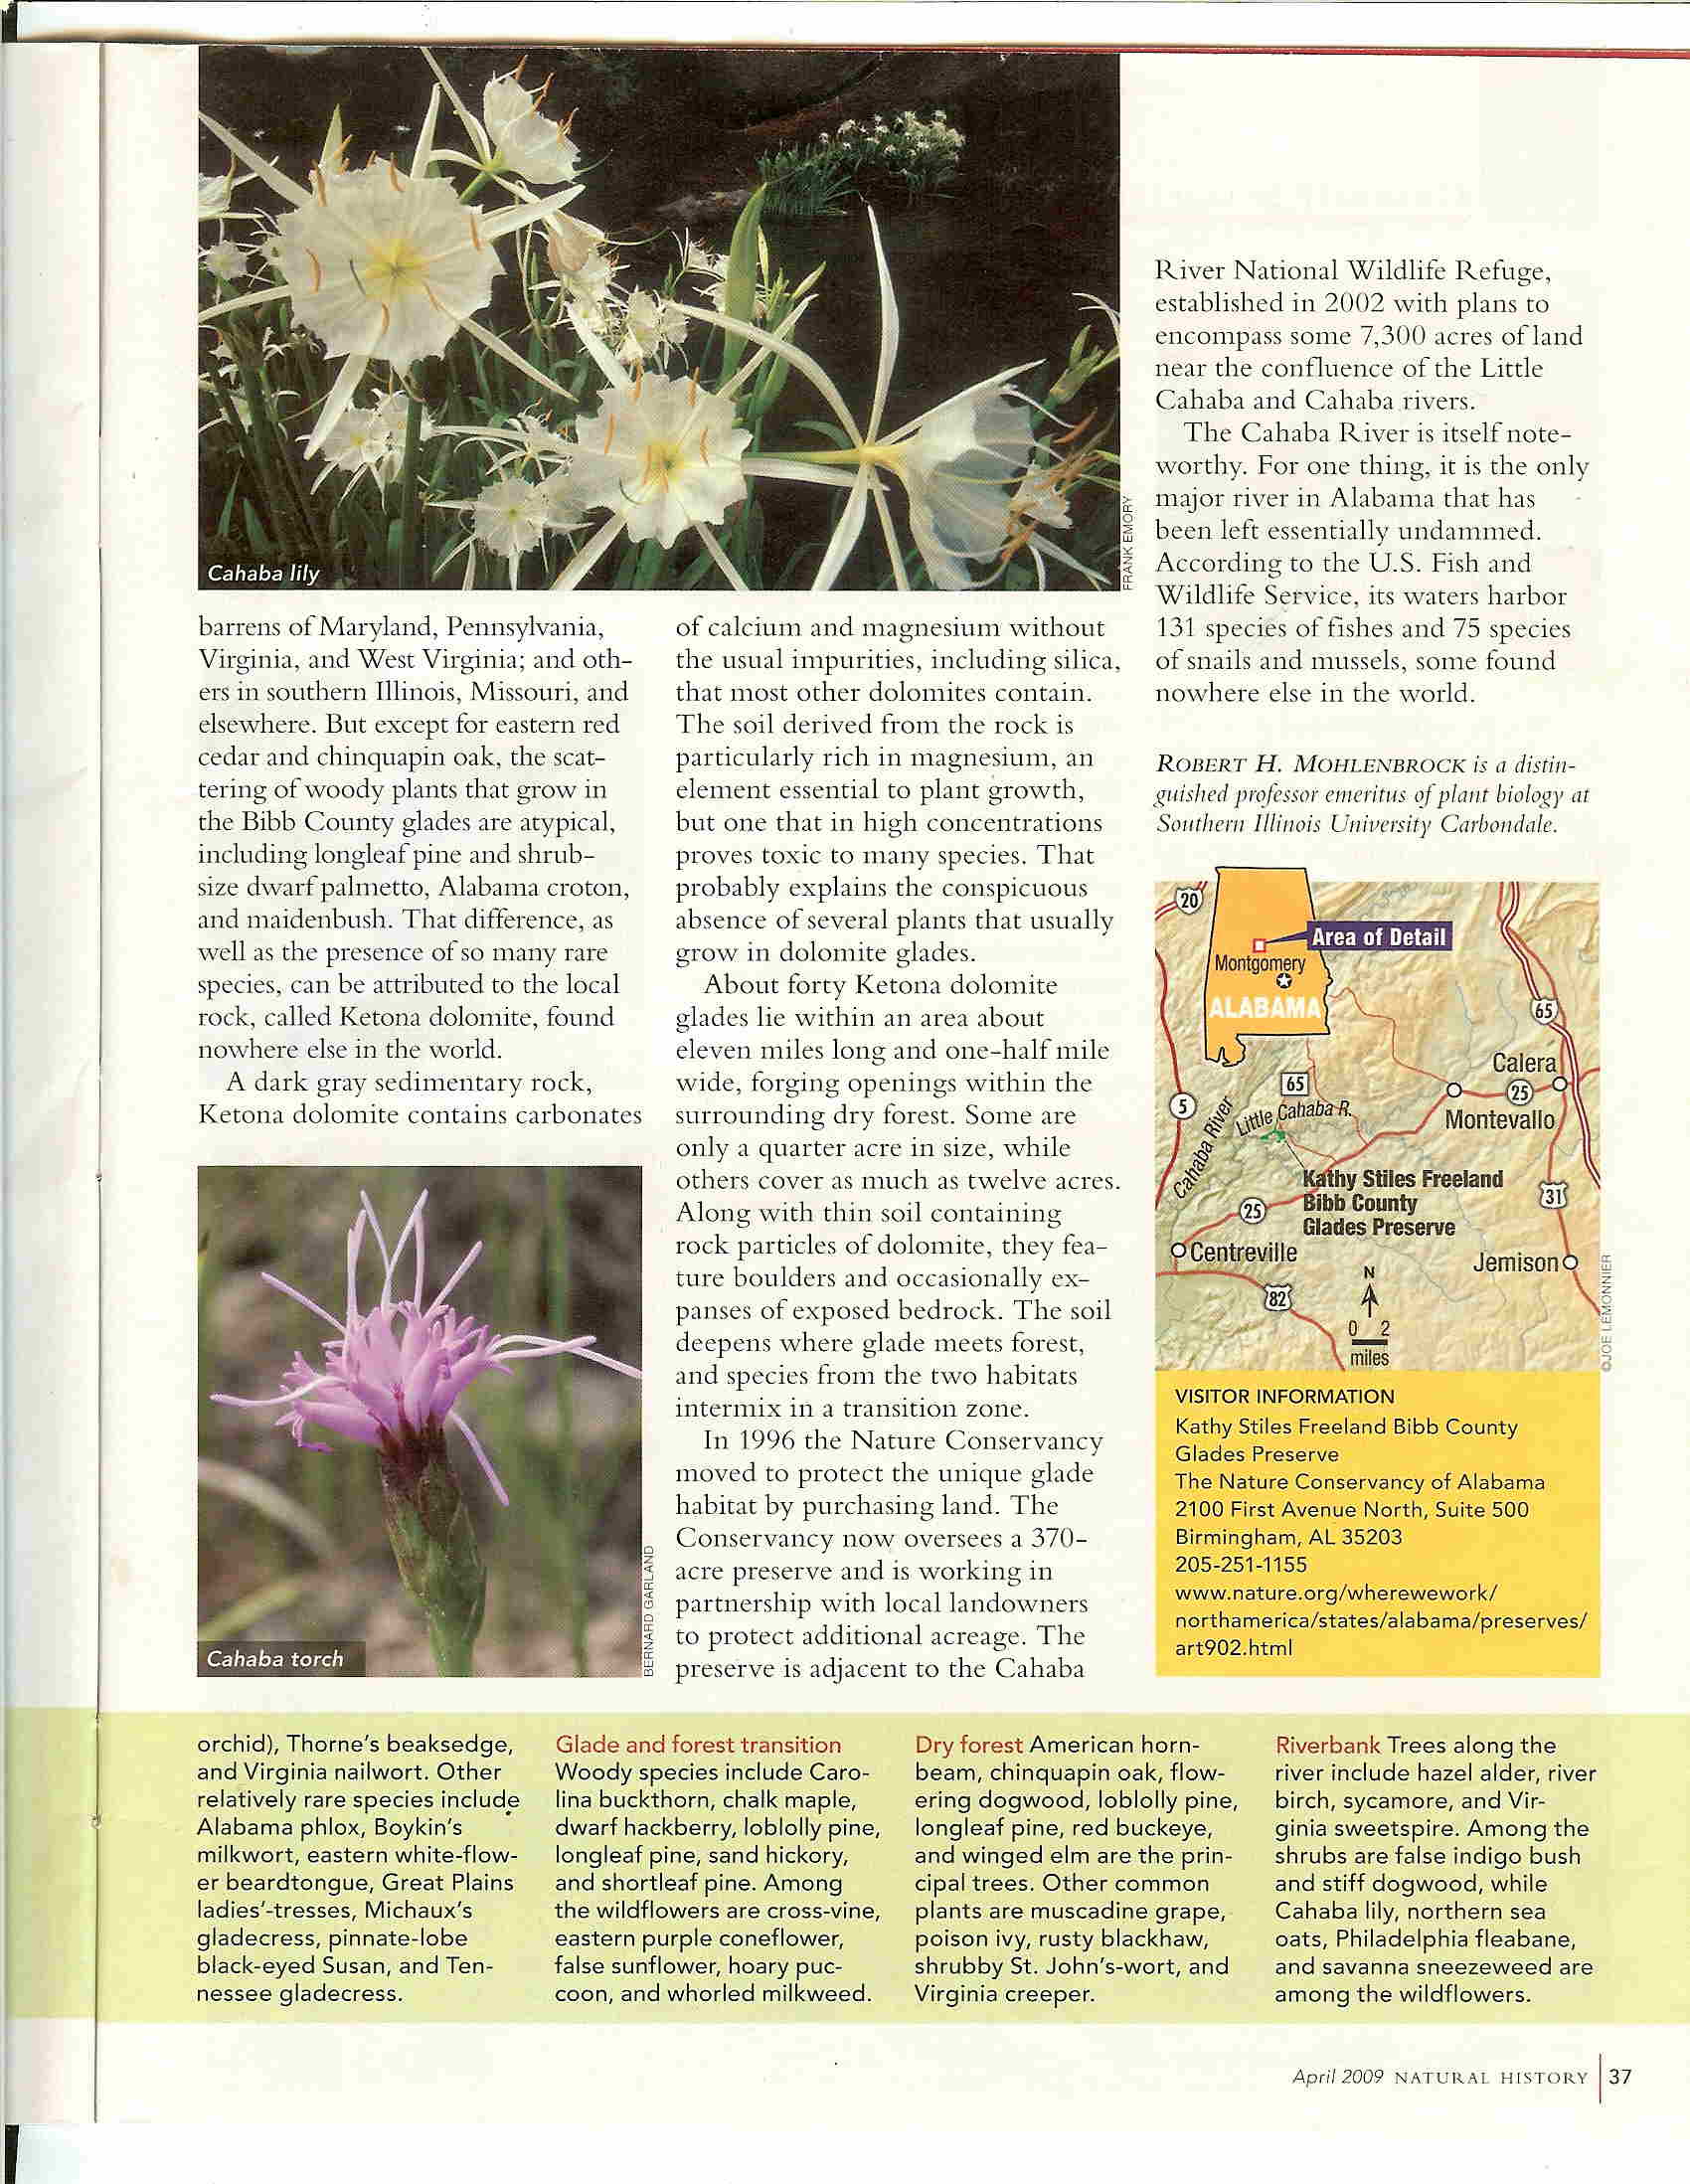 Second page, Robert Mohlenbrock's April 2009 edition of his "This Land" series of articles in Natural History magazine: The Magic Rock Garden